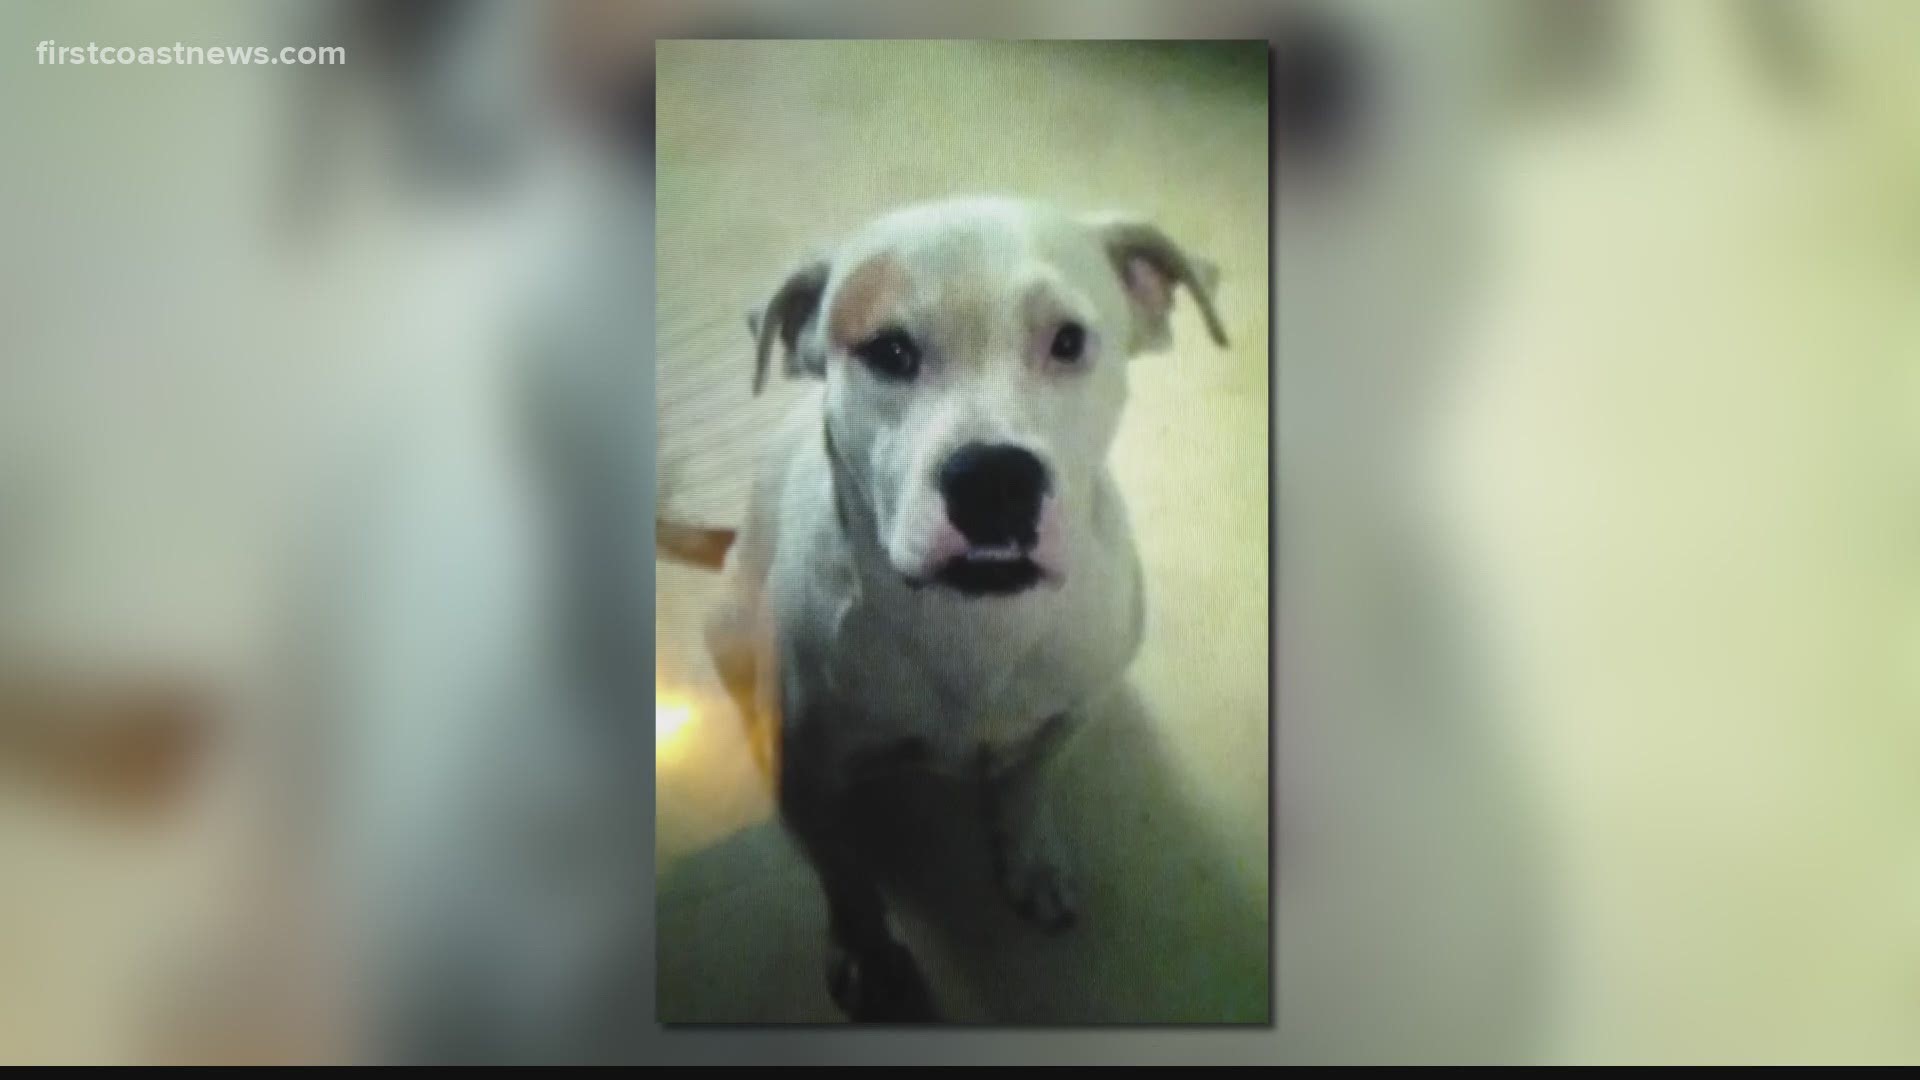 The Jacksonville Sheriff's Office said the dog charged at the officer who was responding to assist JFRD with a medical call. The officer shot the dog three times.